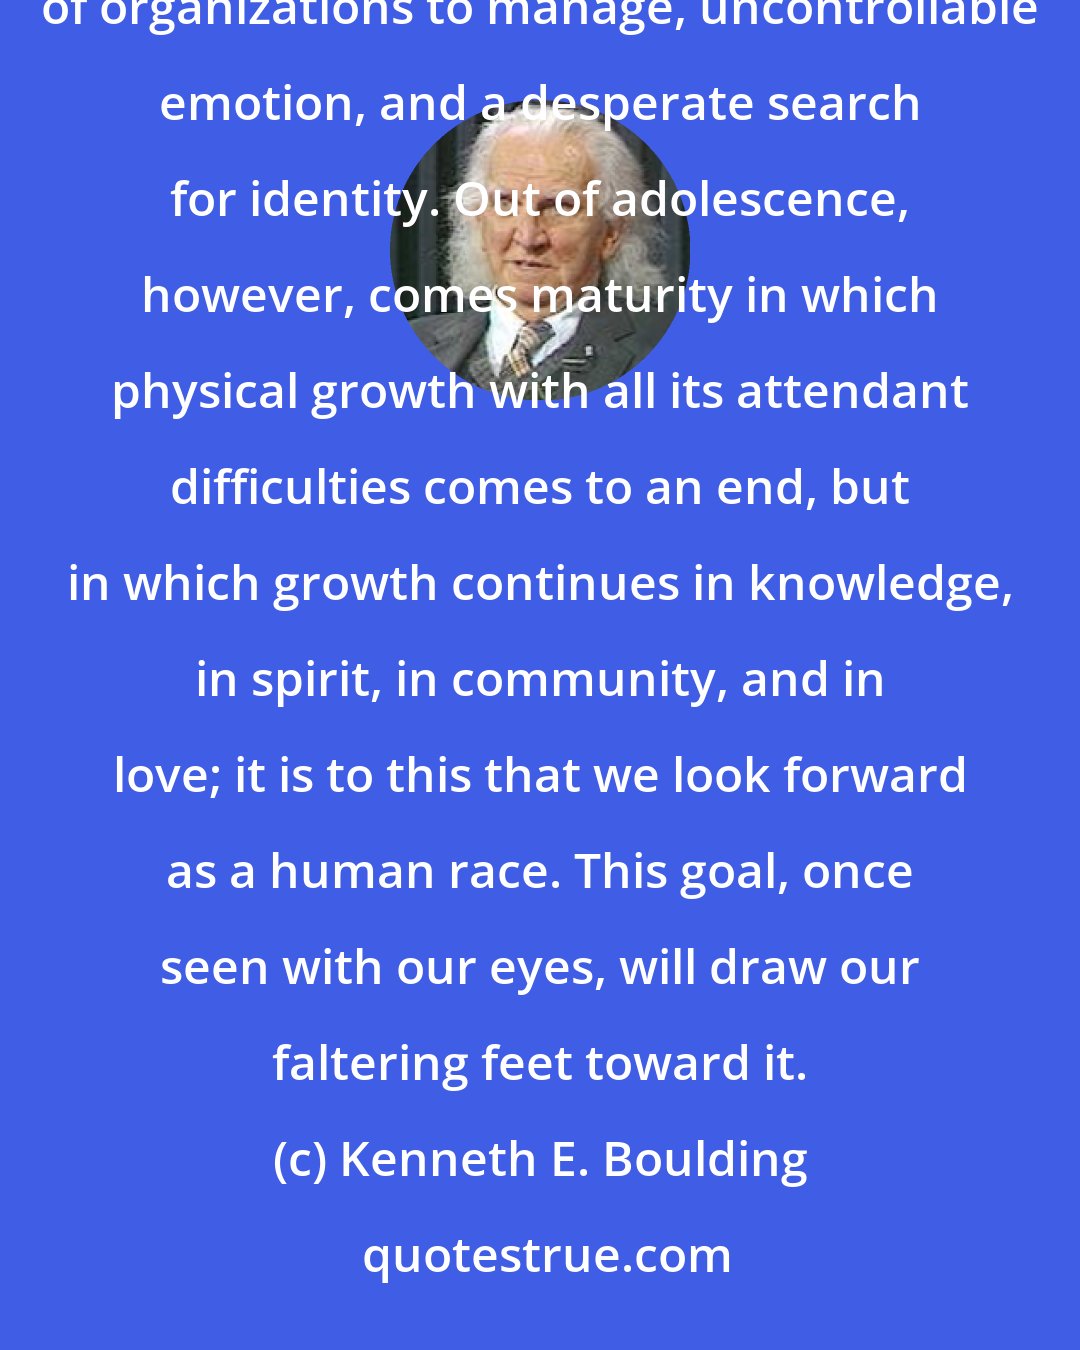 Kenneth E. Boulding: The troubles of the 20th century are not unlike those of adolescence -- rapid growth beyond the ability of organizations to manage, uncontrollable emotion, and a desperate search for identity. Out of adolescence, however, comes maturity in which physical growth with all its attendant difficulties comes to an end, but in which growth continues in knowledge, in spirit, in community, and in love; it is to this that we look forward as a human race. This goal, once seen with our eyes, will draw our faltering feet toward it.